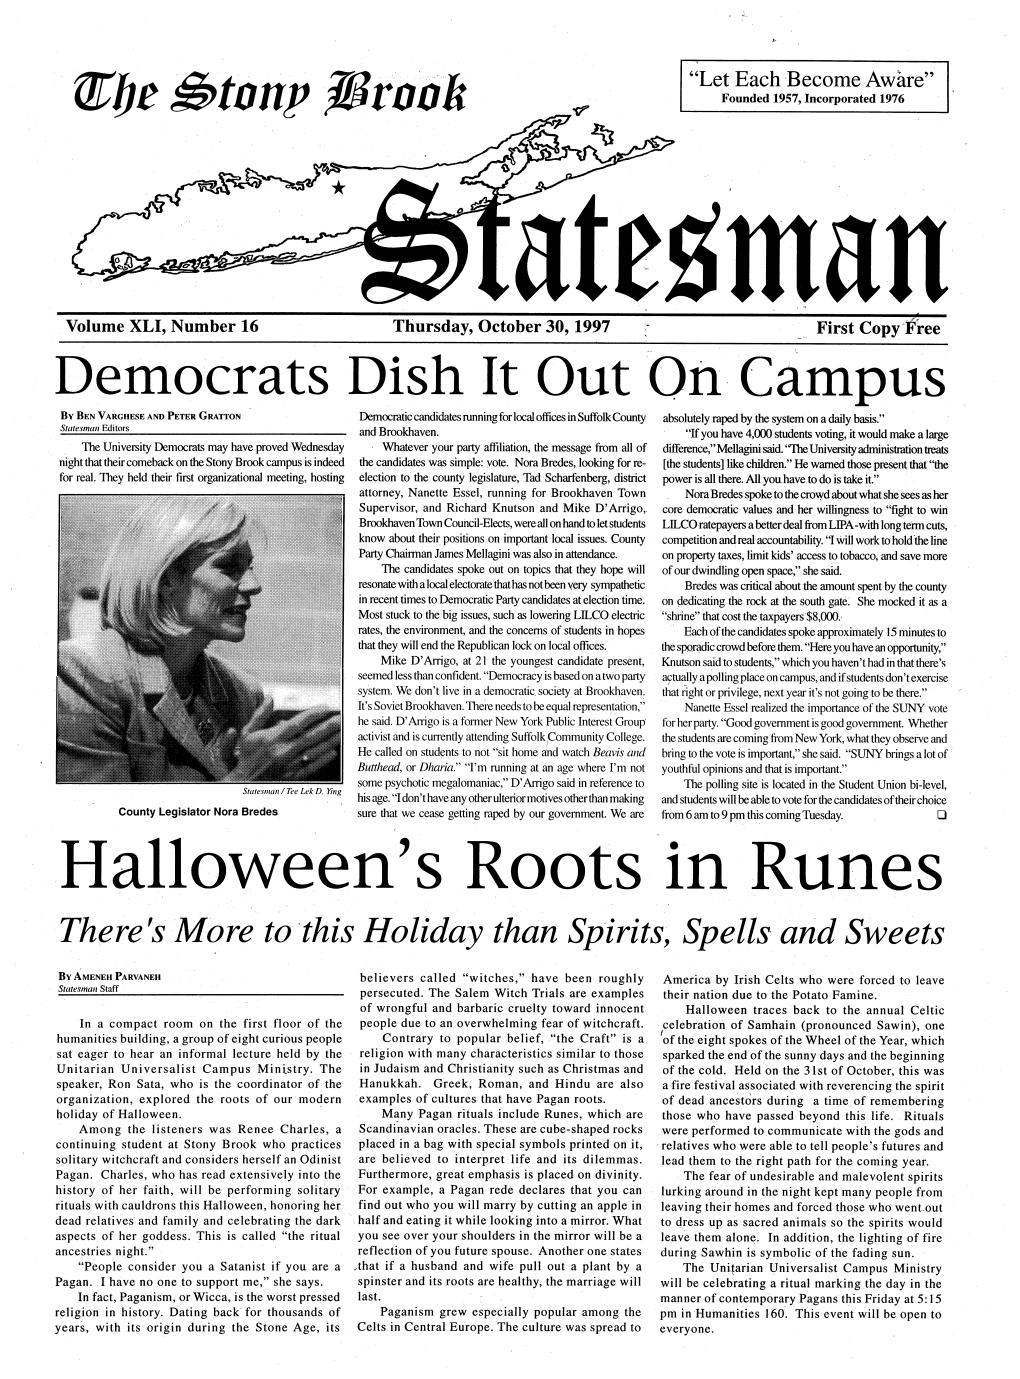 Democrats Dish It out on Campl Halloween's Roots in Rune